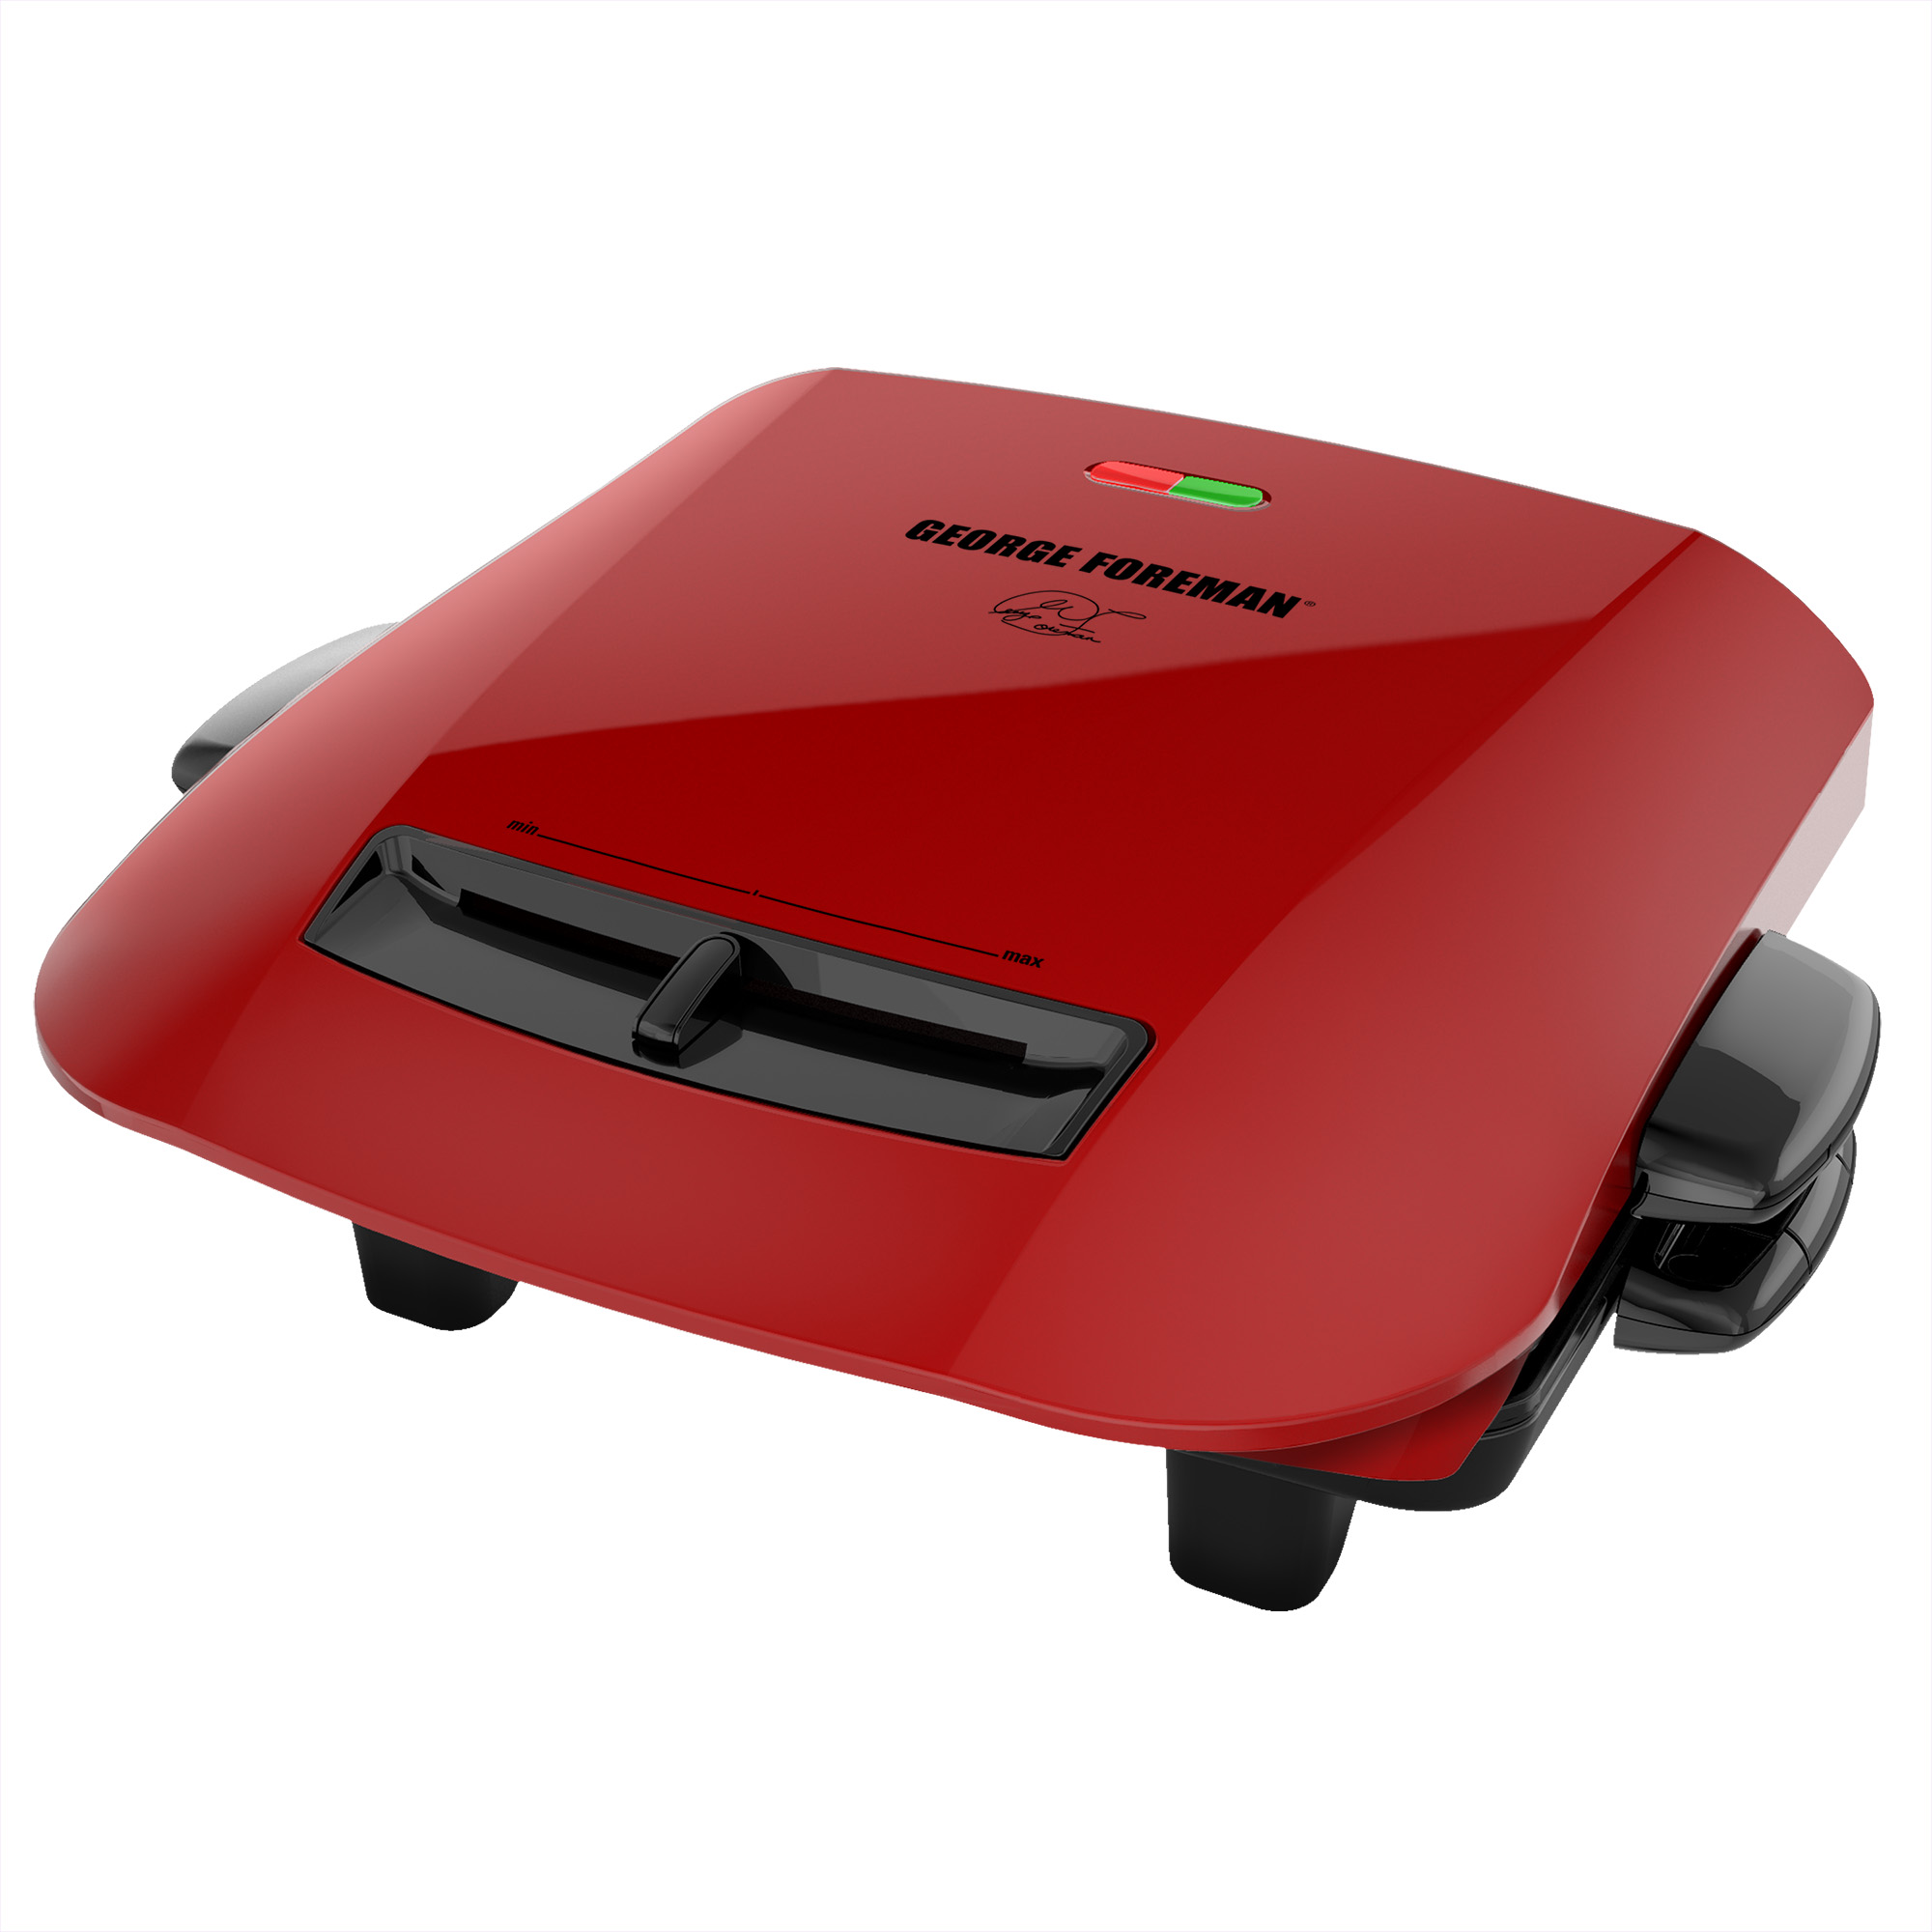 George Foreman 5-Serving Removable Plate Grill and Panini Press, Red, GRP2841R - image 1 of 12